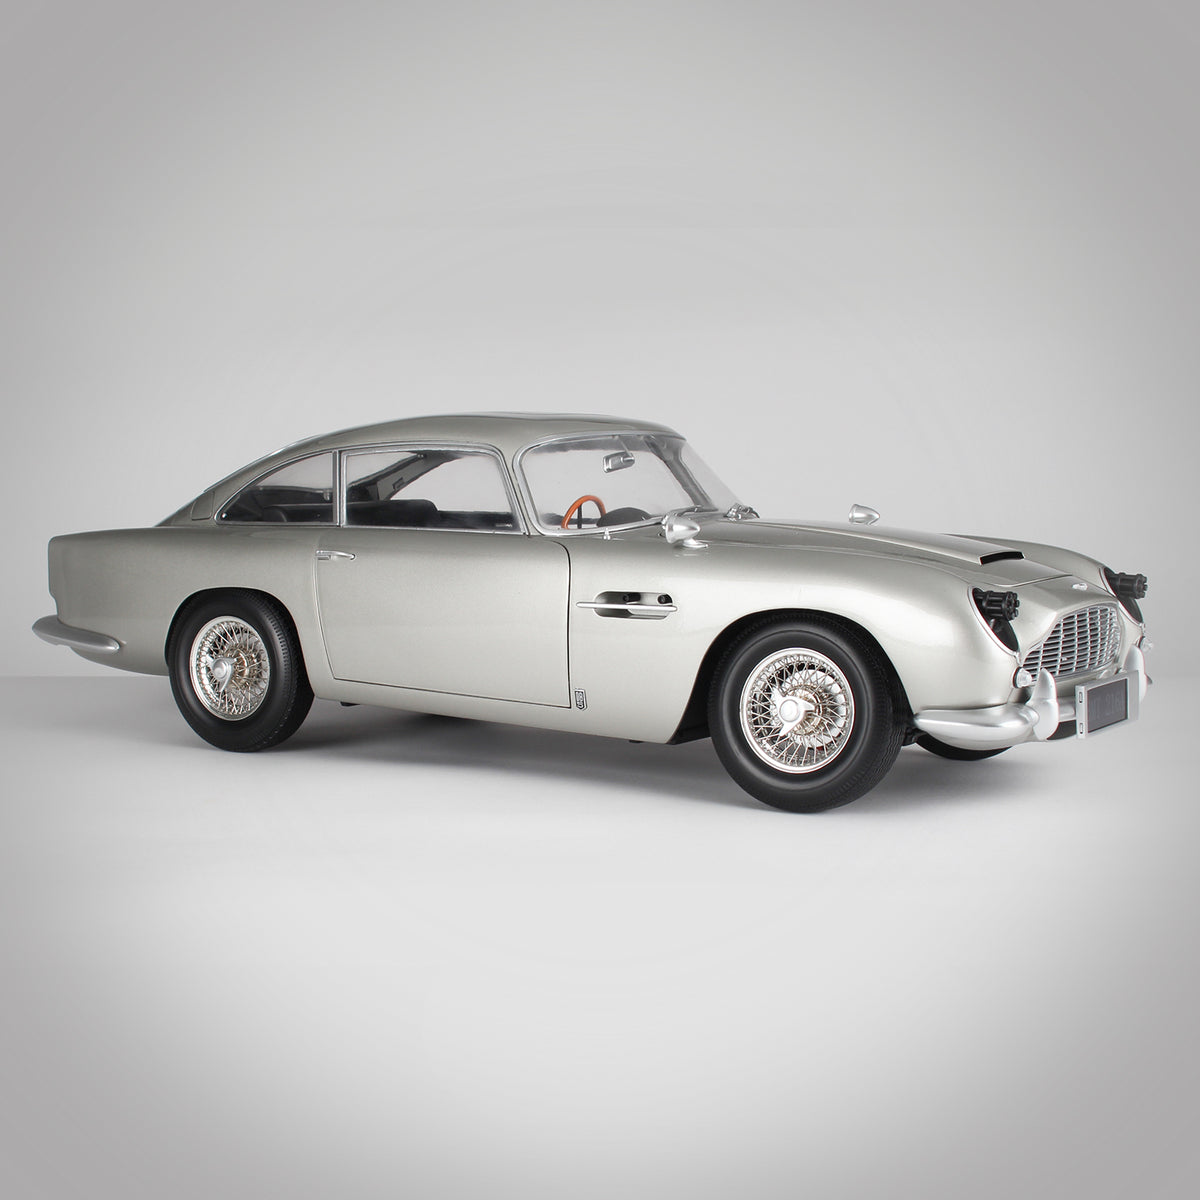 James Bond No Time To Die Aston Martin DB5 1:8 Model Kit - Subscription - By Agora Models